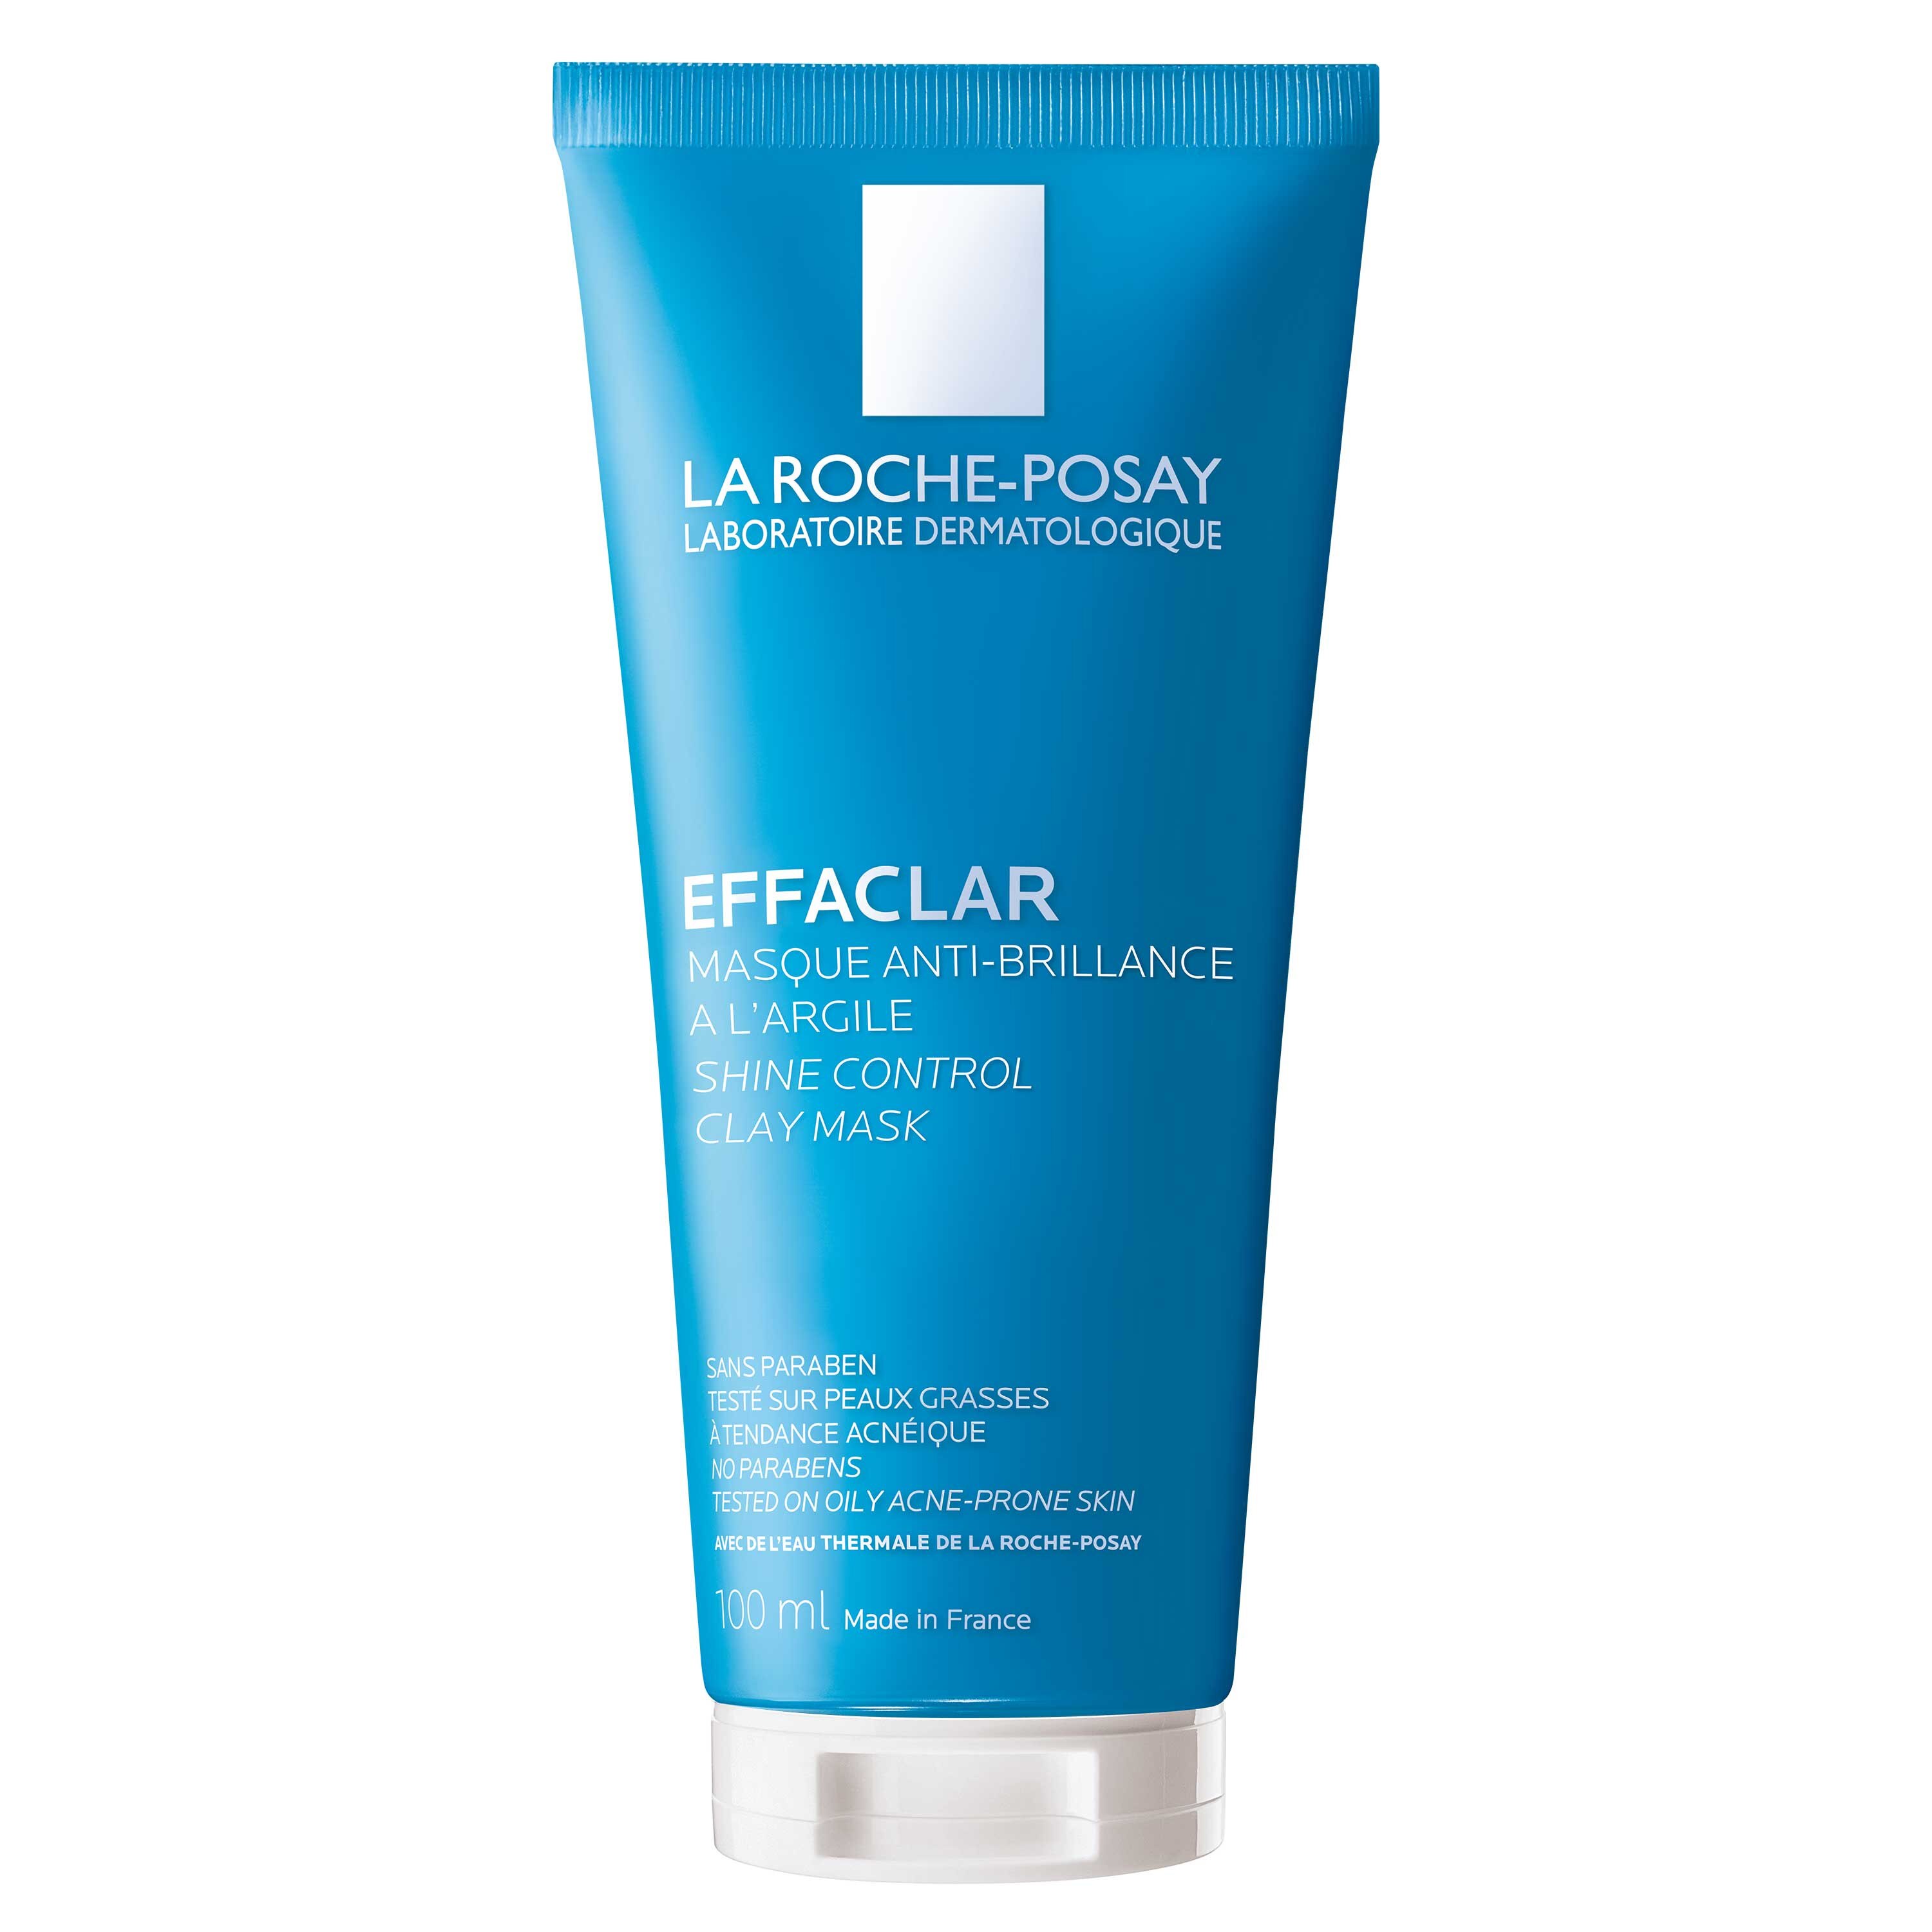 La Roche-Posay Effaclar Clarifying Clay Face Mask for Oily Skin, Unclogs Pores and Controls Shine Without Over-Drying